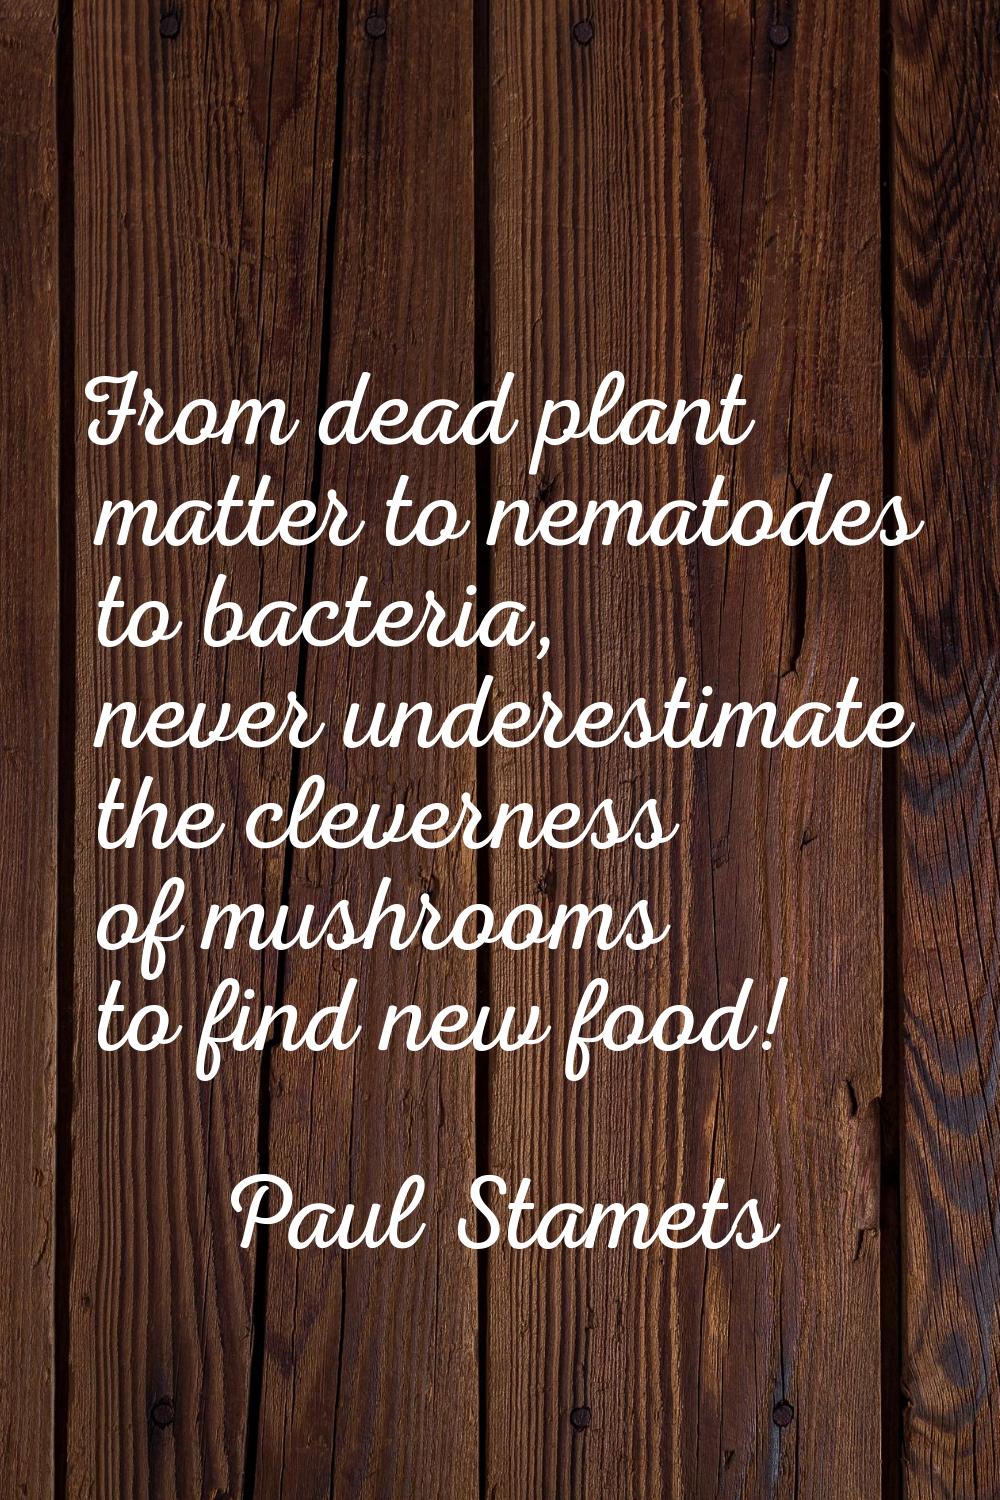 From dead plant matter to nematodes to bacteria, never underestimate the cleverness of mushrooms to